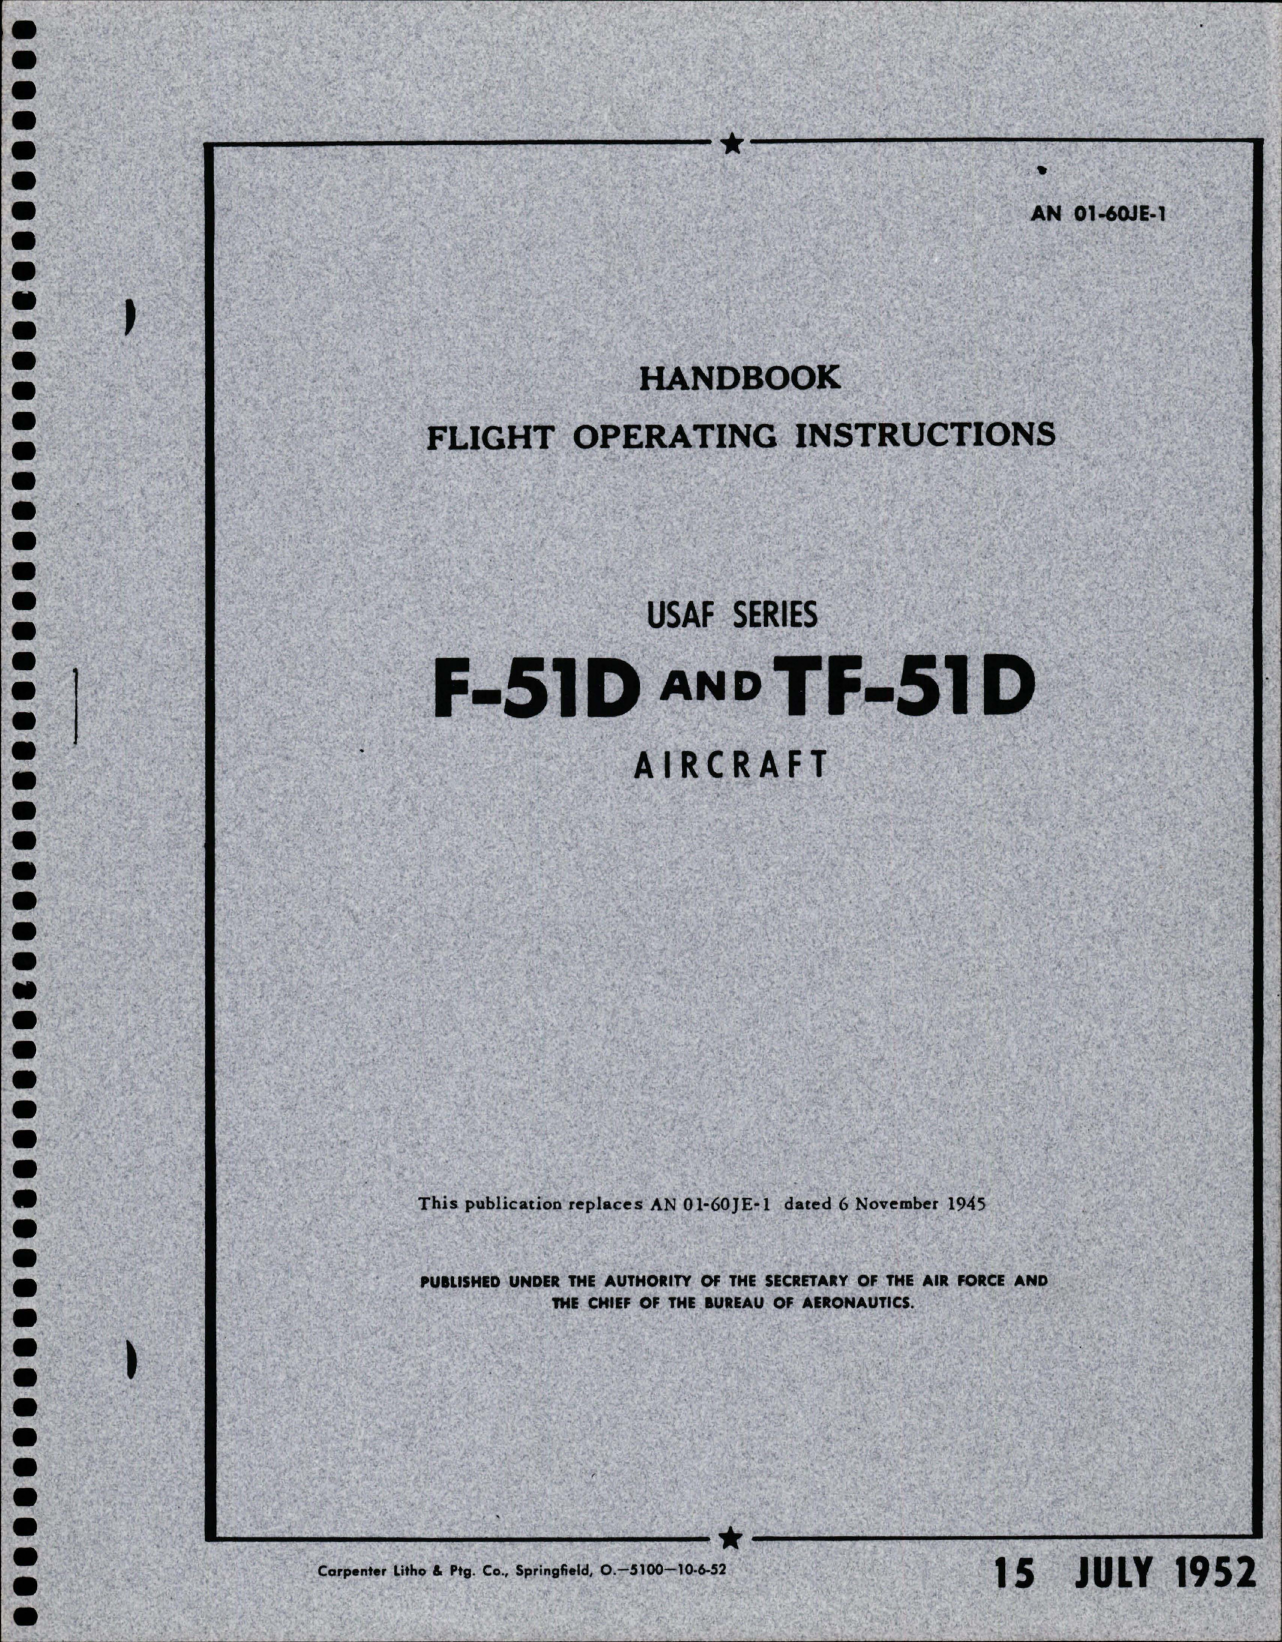 Sample page 1 from AirCorps Library document: Flight Operating Instructions for F-51D and TF-51D